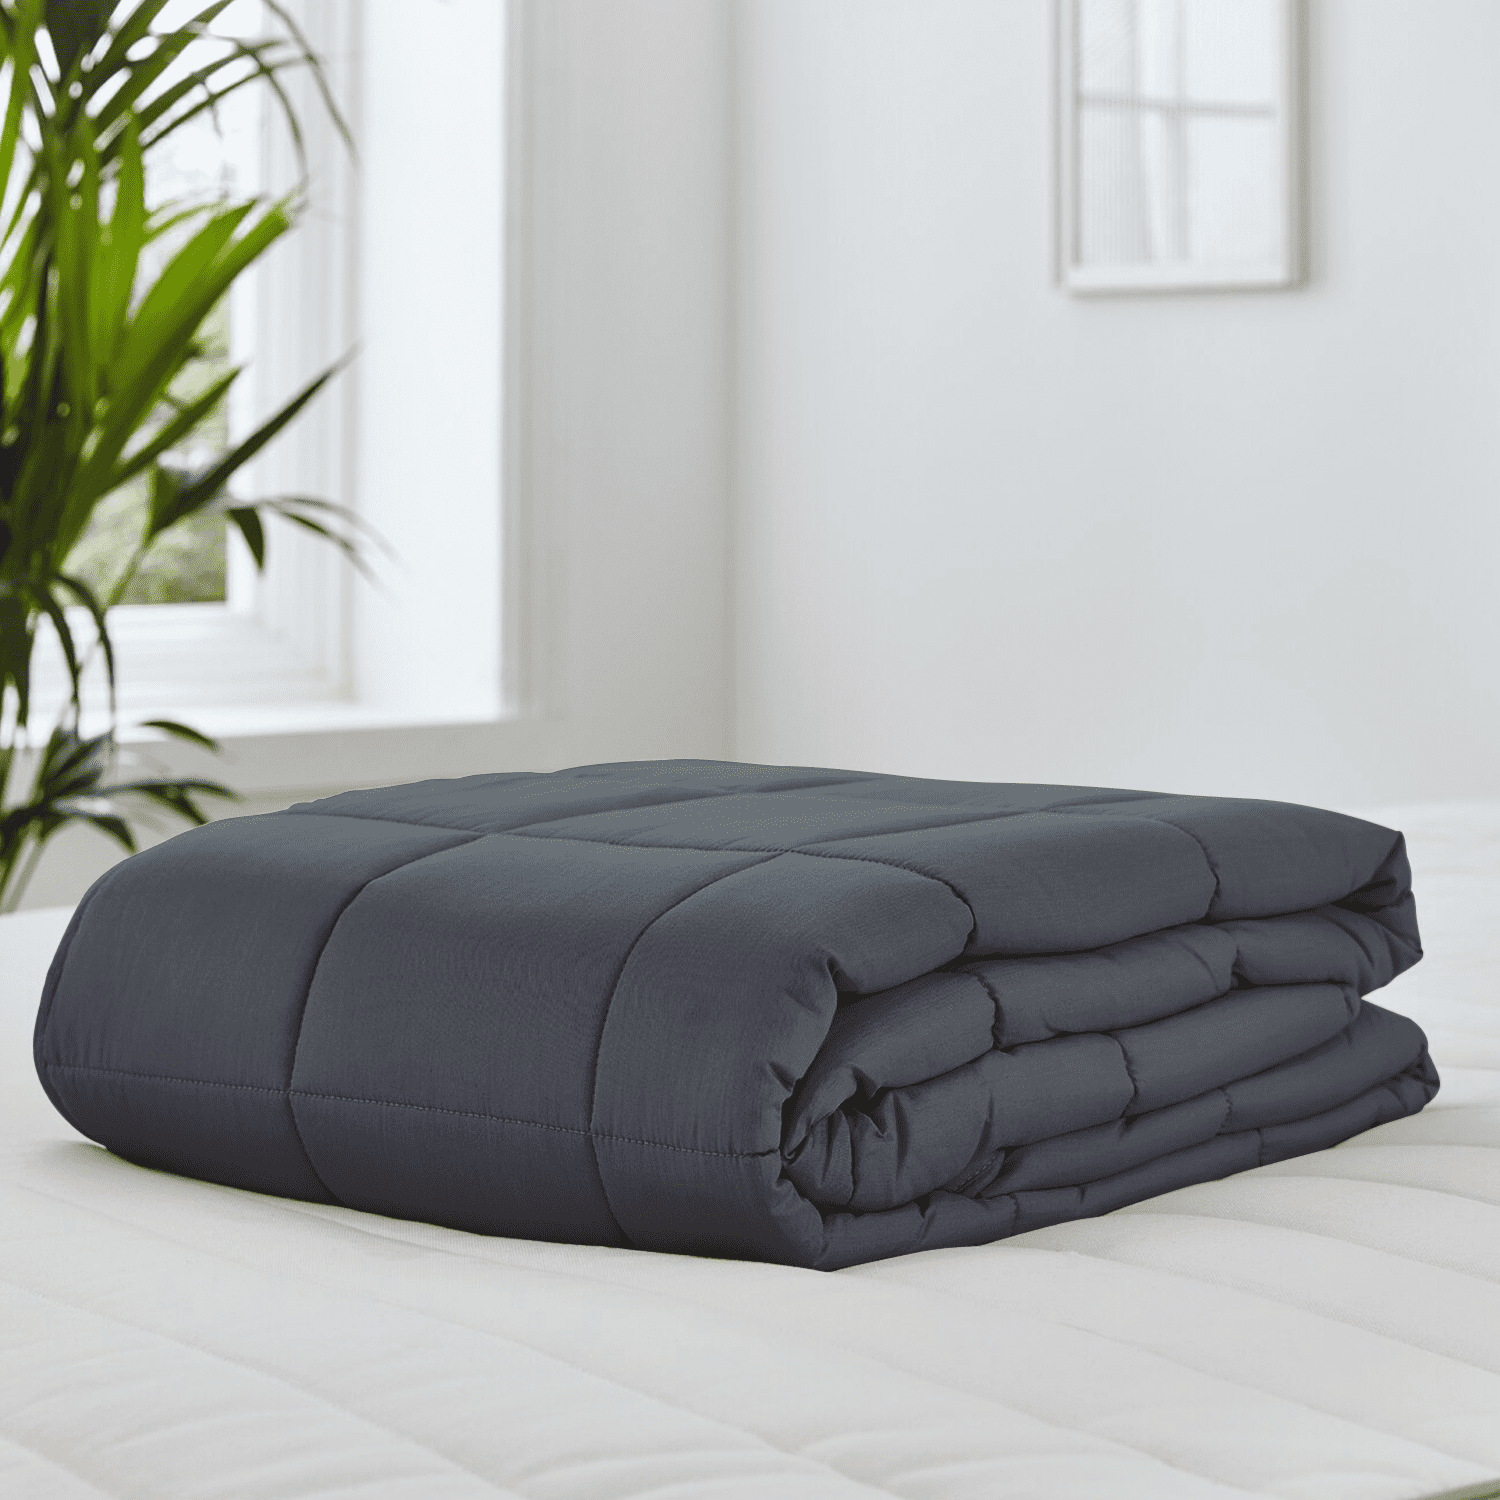 Weighted Throw Blanket Twin Size 6.8 Kg Glass Beads Filled Heavy Multilayered 